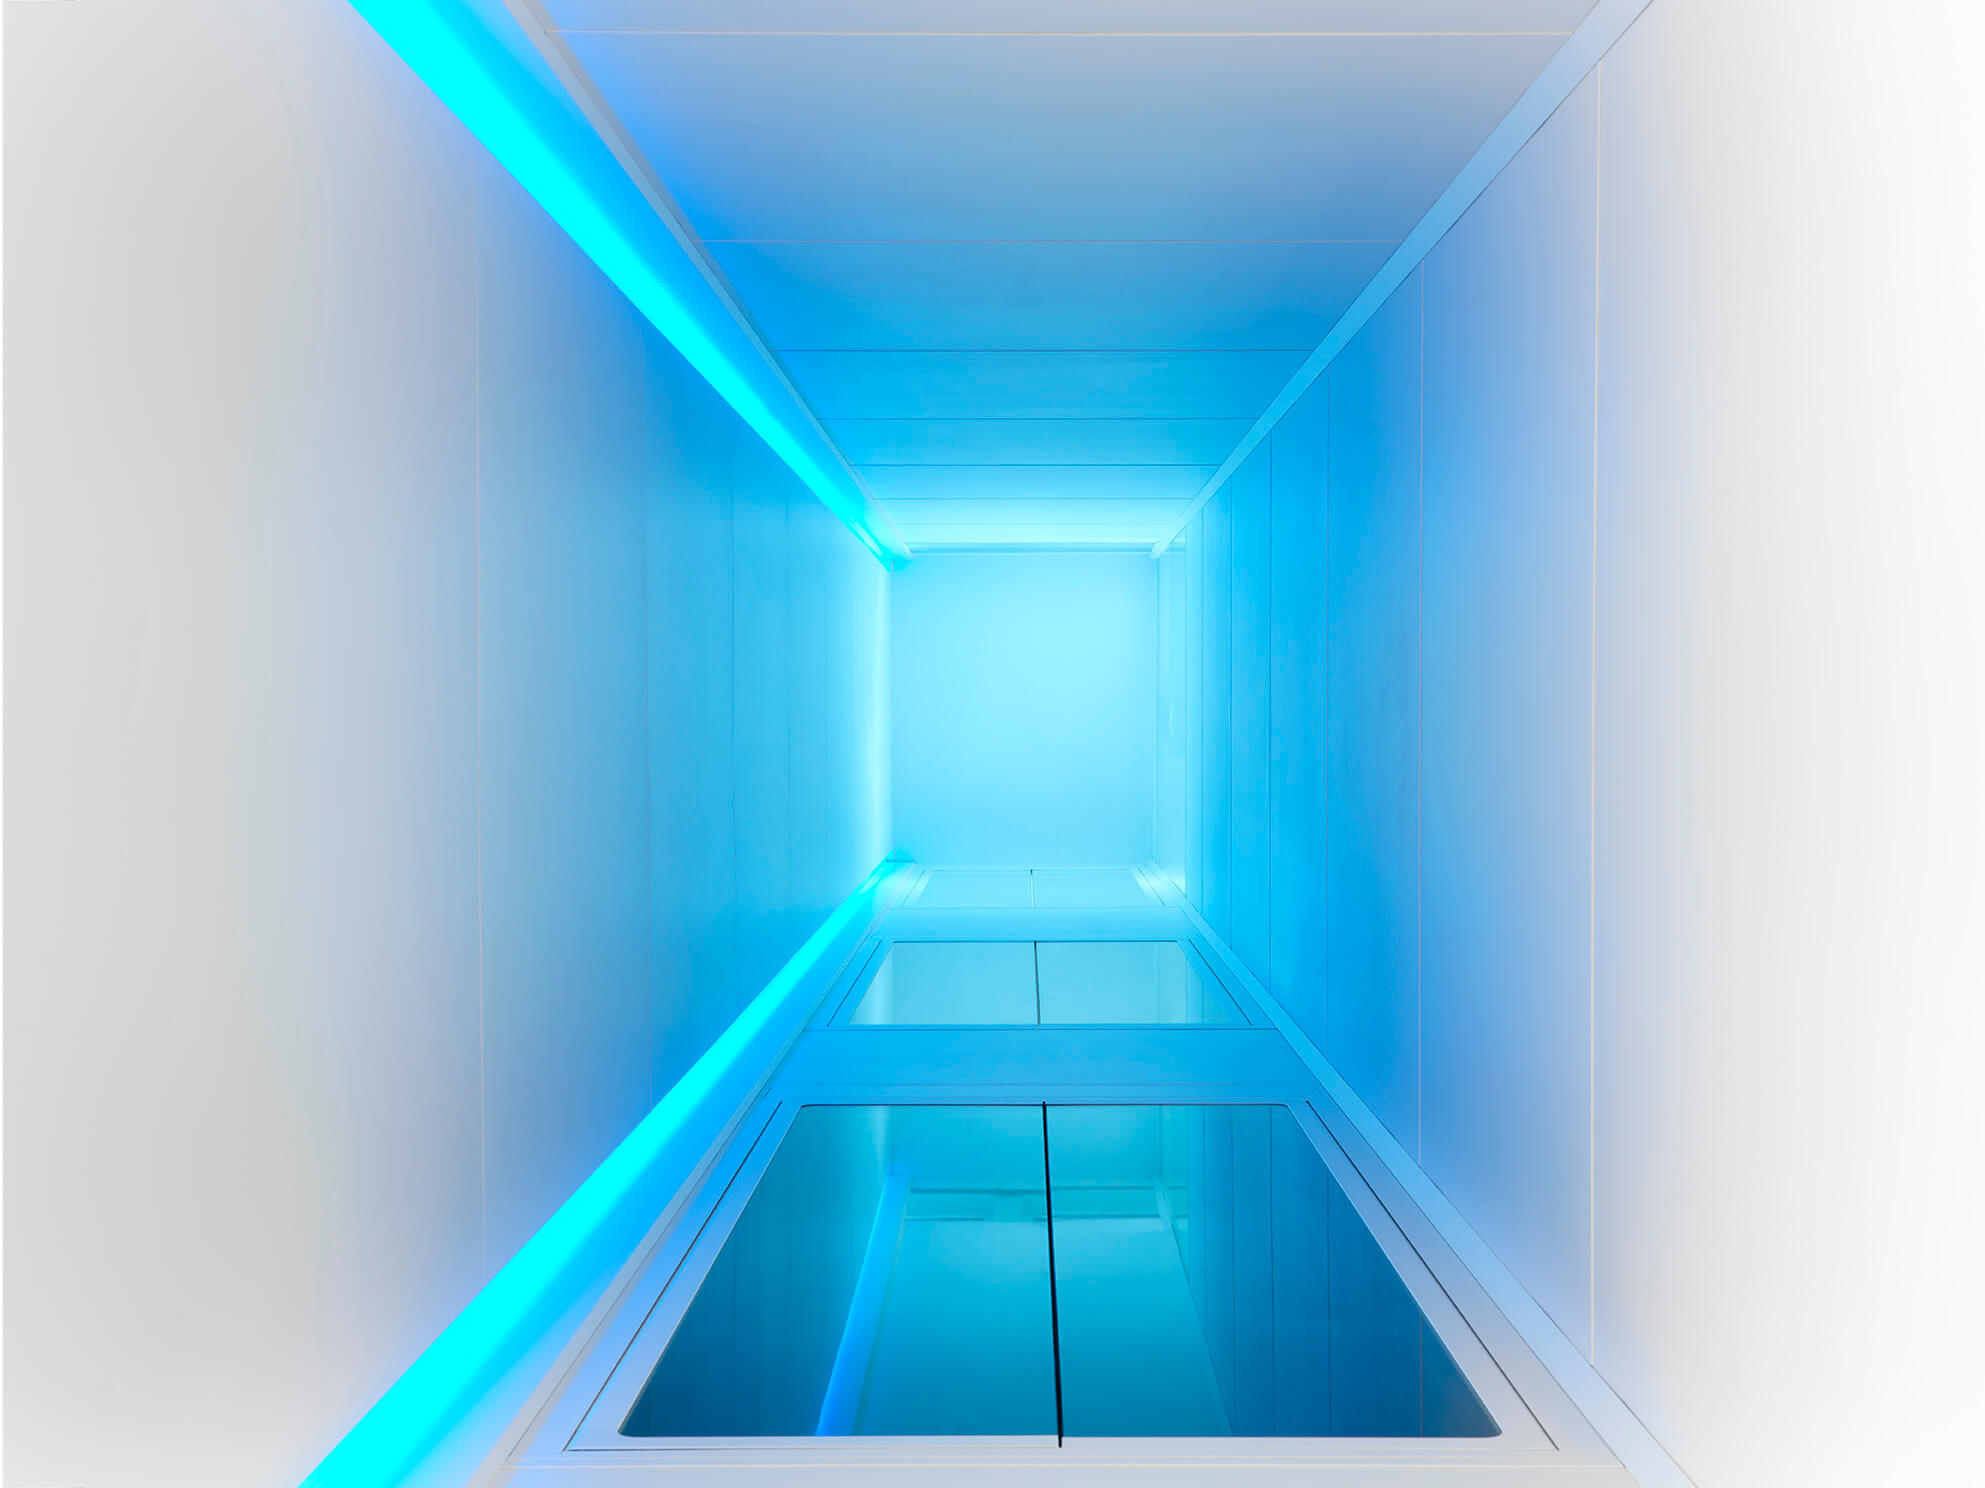 Have the elevator shaft light up in different colors